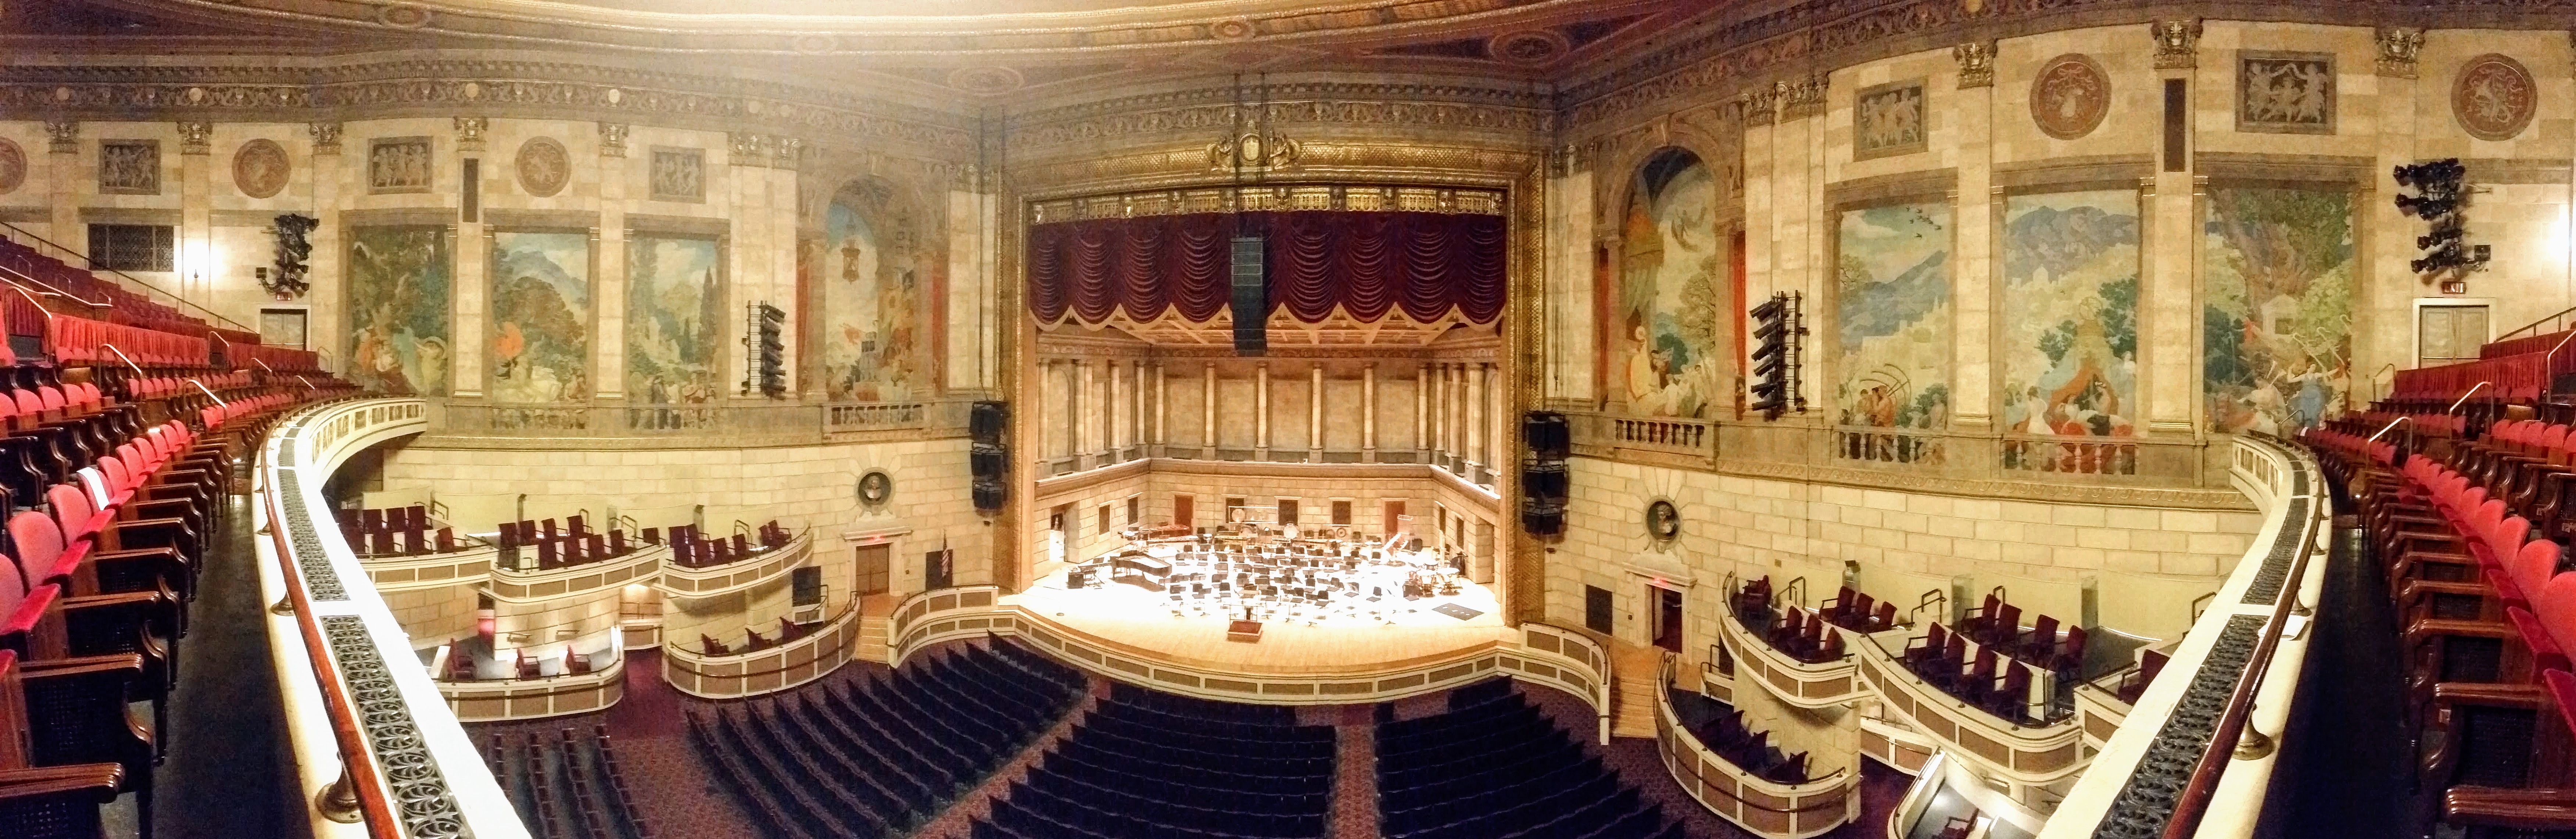 panorama of inside eastman theater